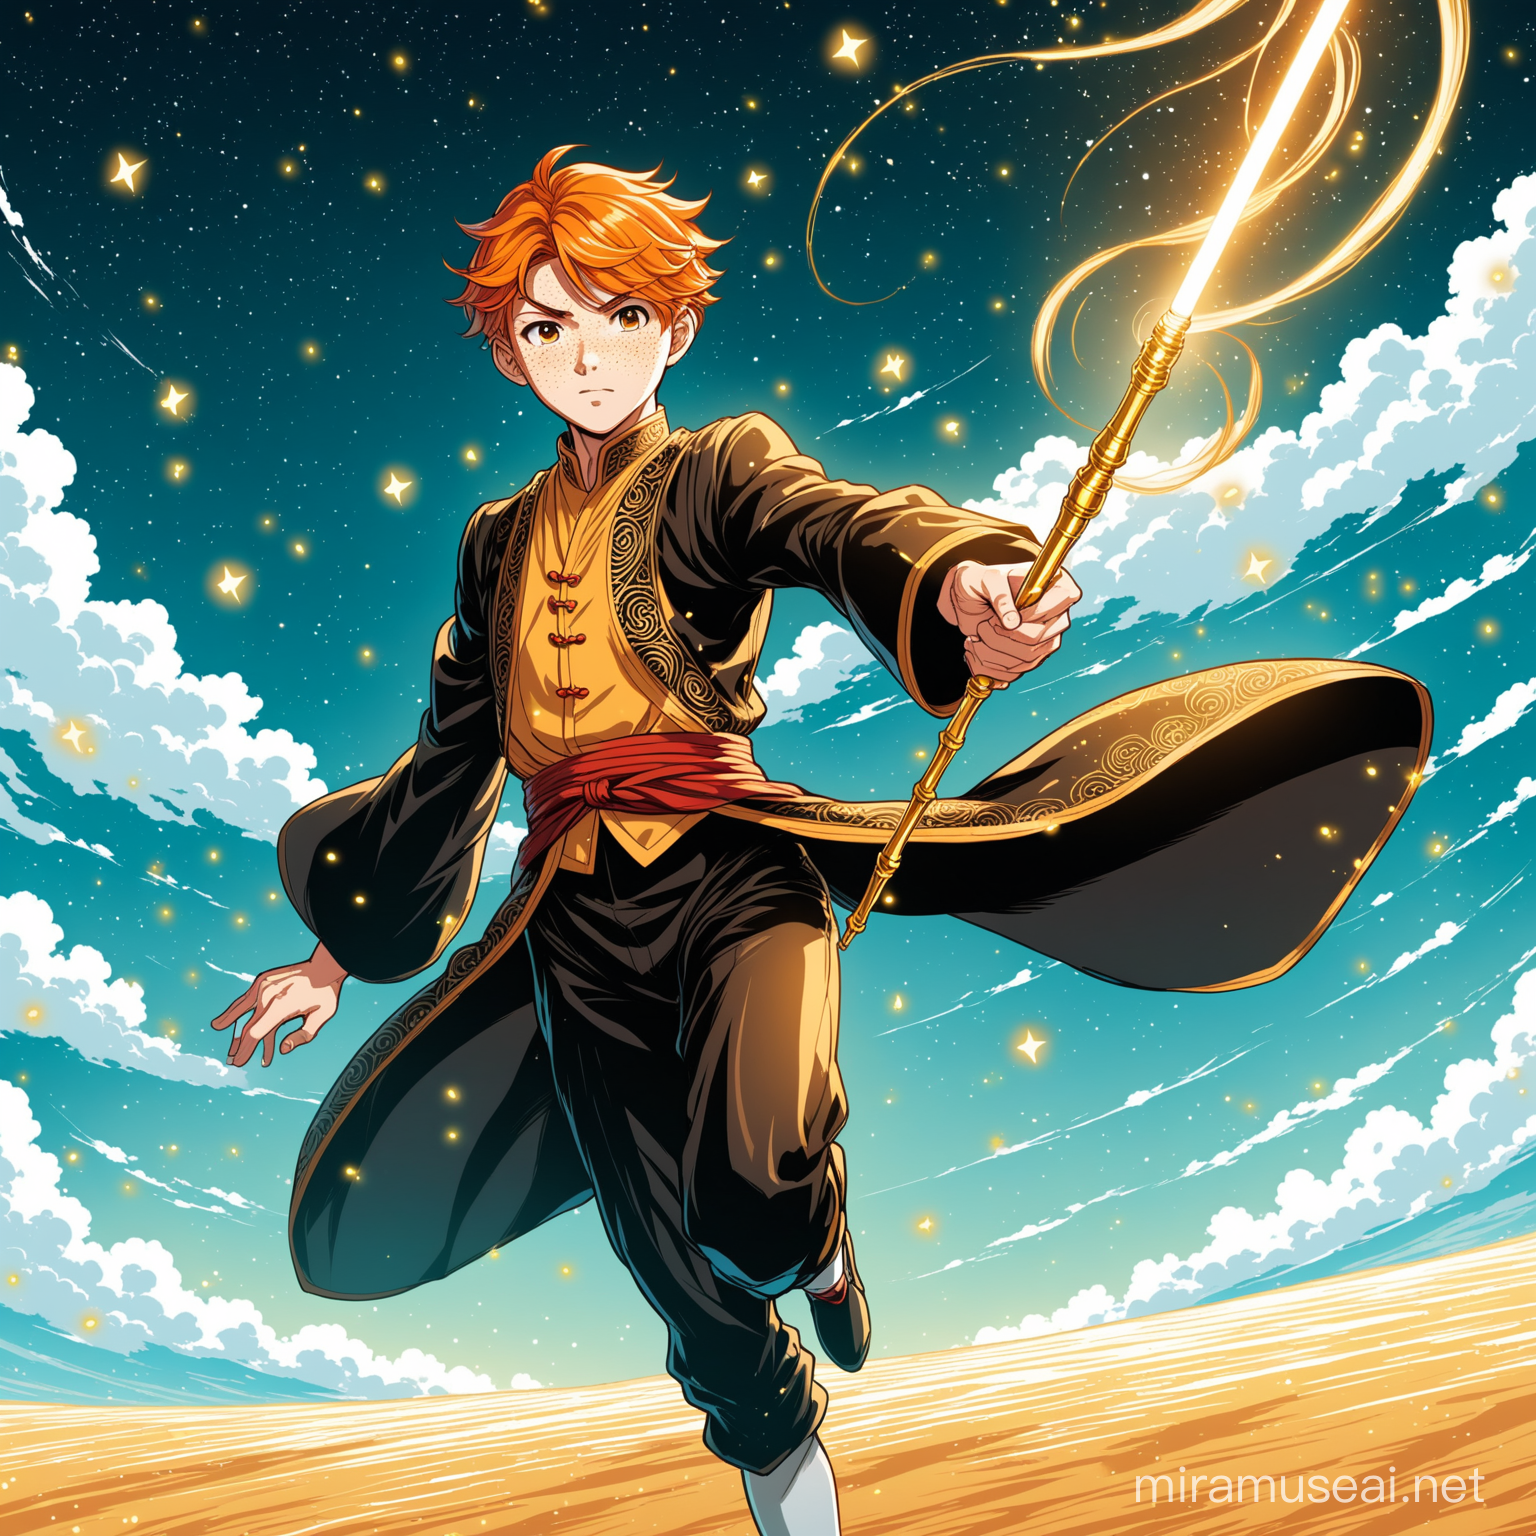 Young male magician with effeminate face, short-cropped orange hair, oriental magician's outfit, freckles, hazel eyes with golden highlights, on a gigantic plain, wind blowing, manga style, magic wand.